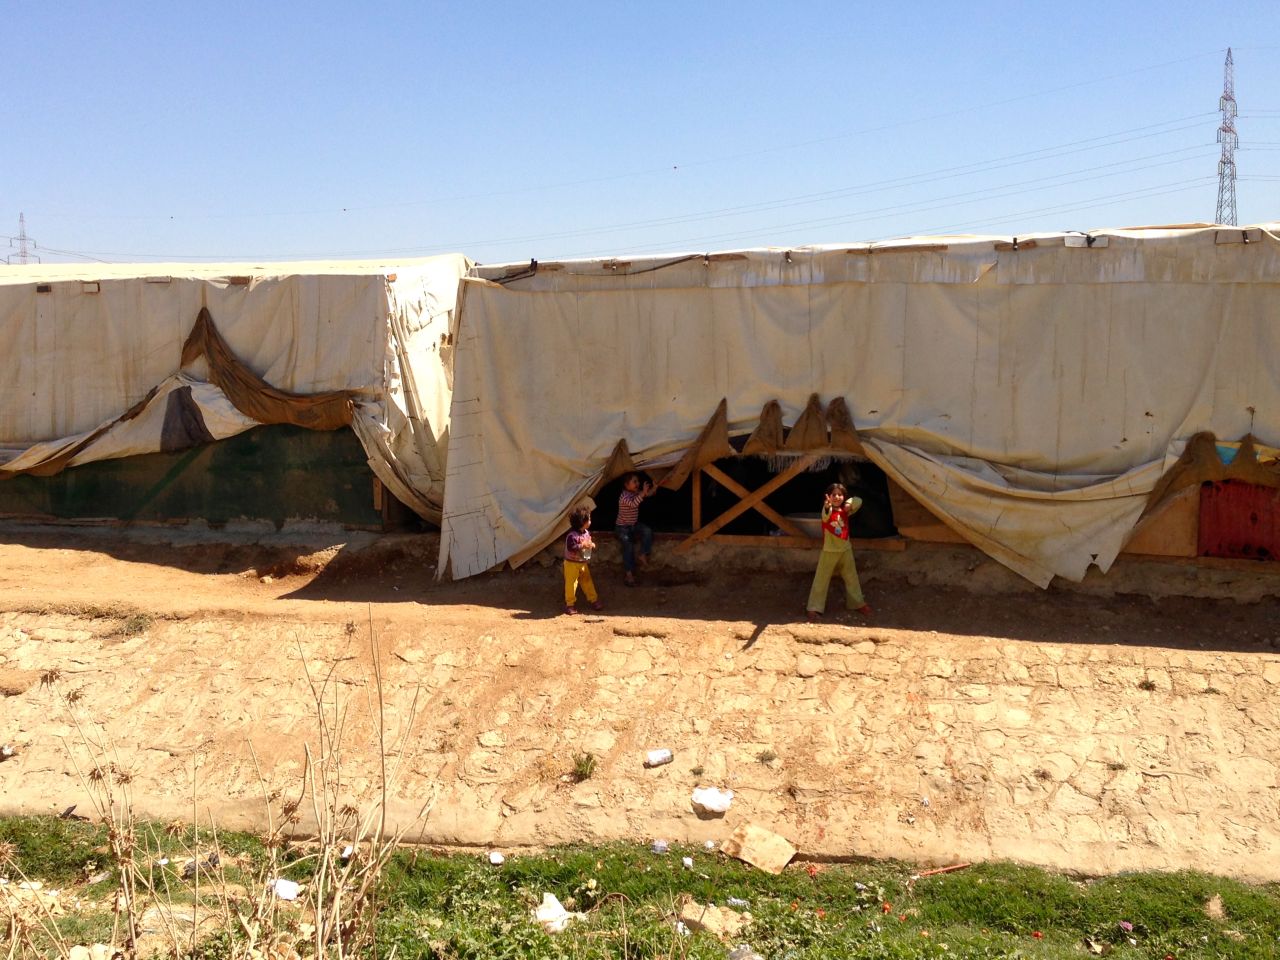 According to aid group workers, the sheriff in this Lebanon border town near Syria charges the refugees who set up shelter in the dirt here $100 a month. 